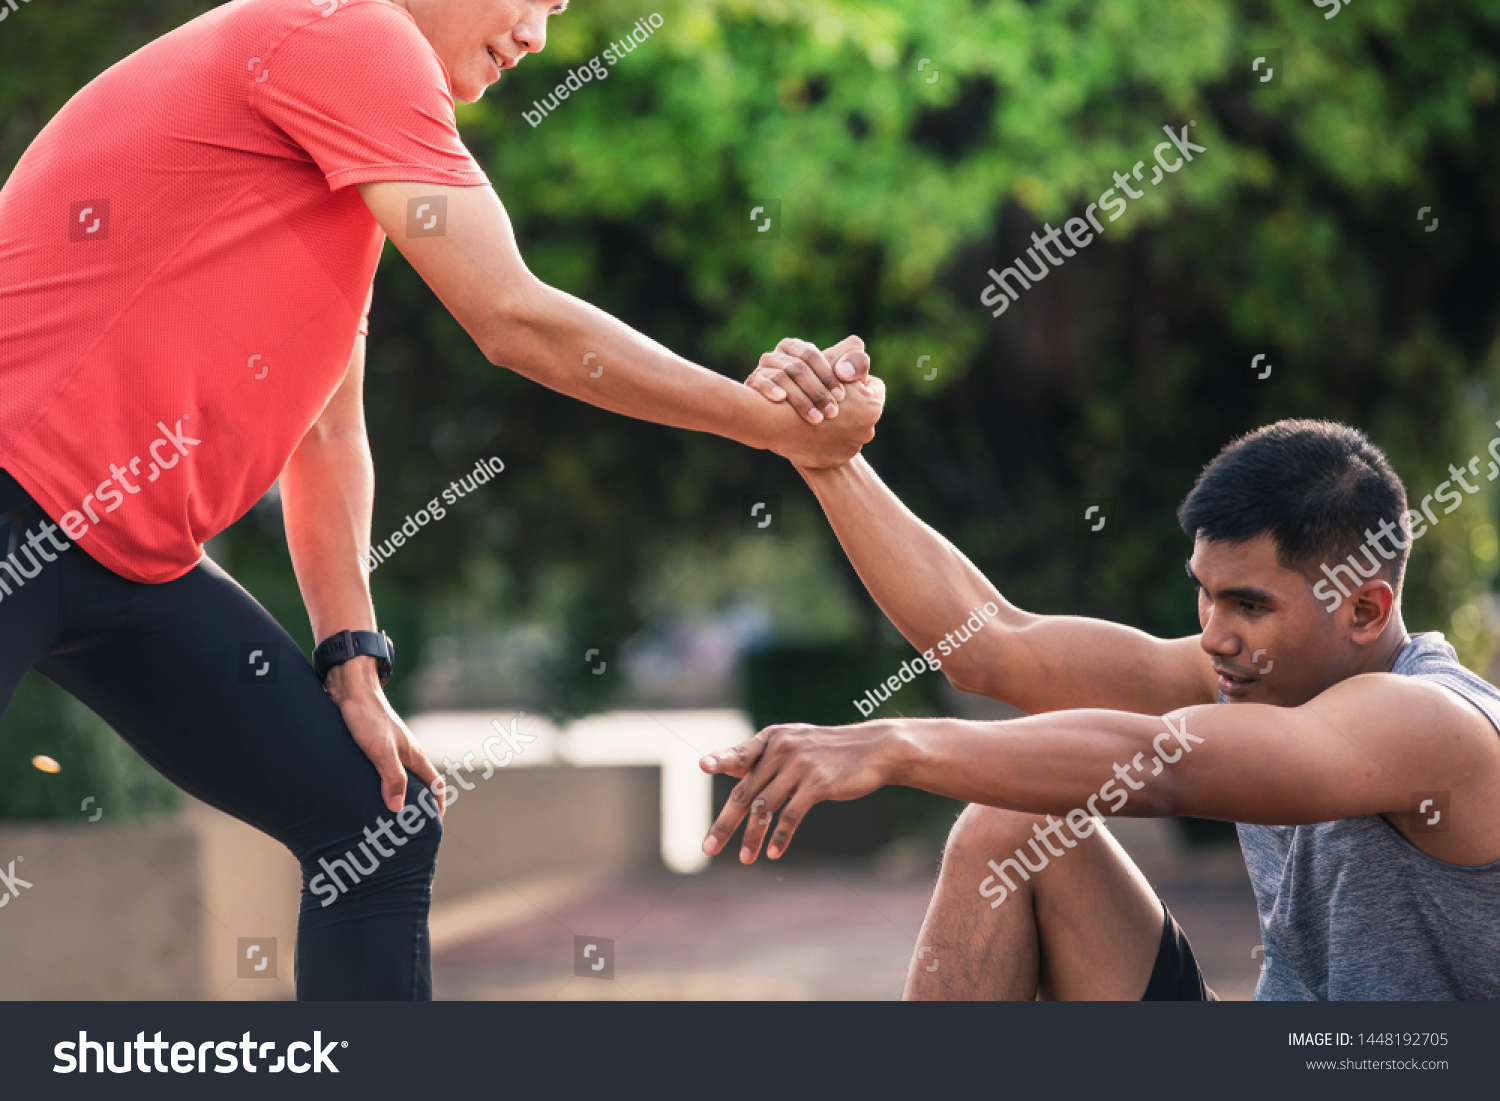 Helping hand outstretched for salvation . Strong hold. Running man helping his friend. Man help each other to run on the running track.
 #1448192705